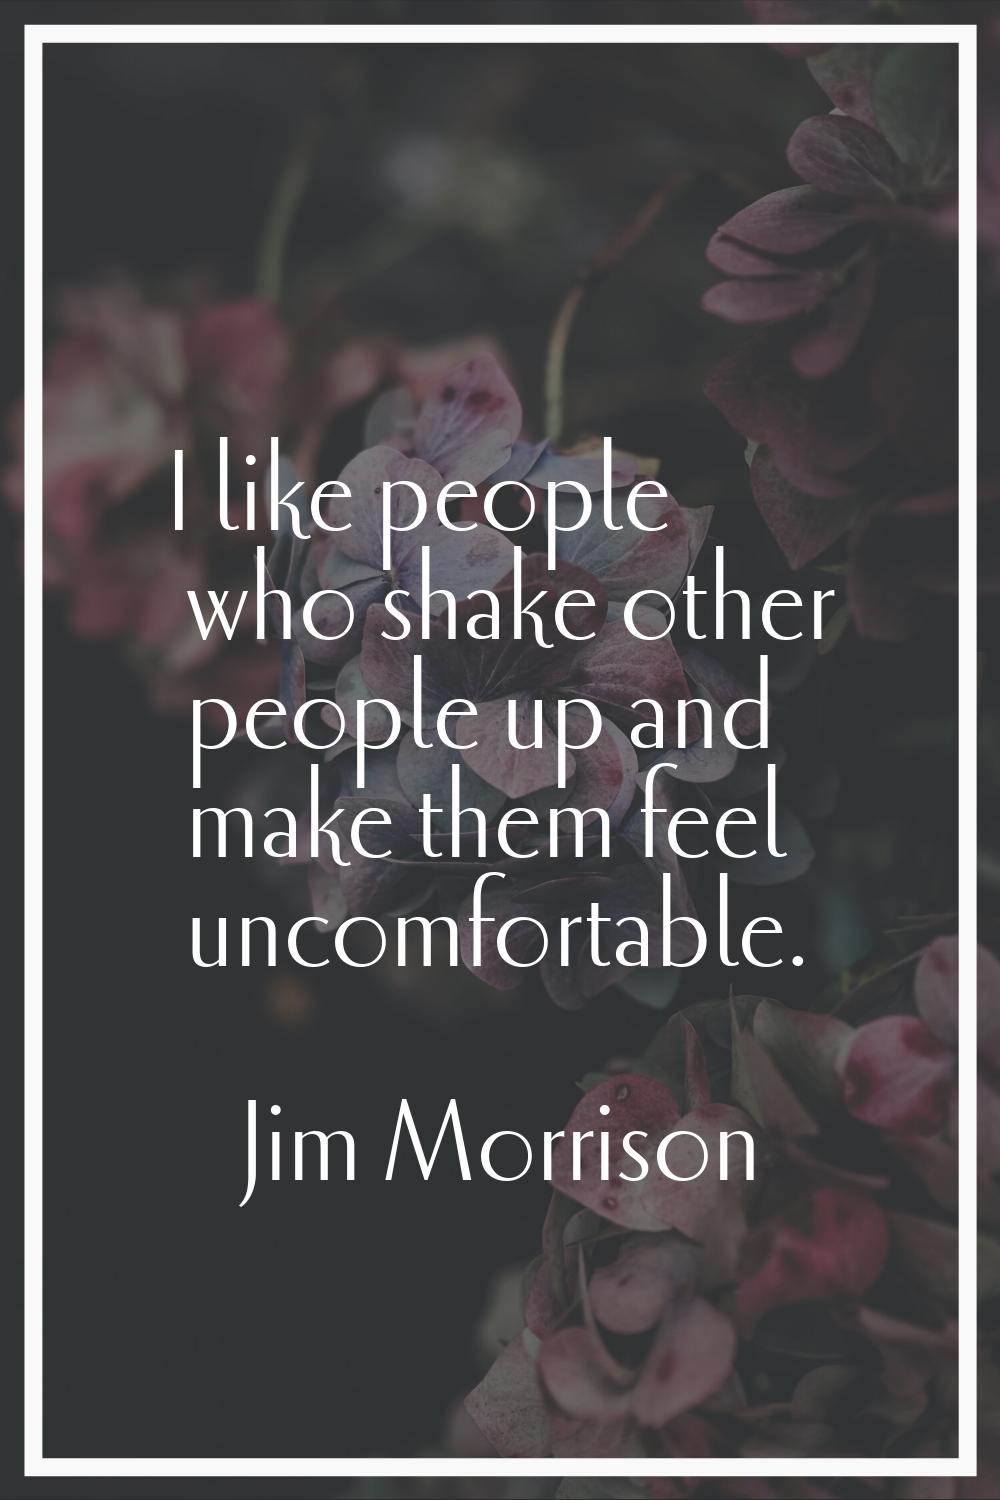 I like people who shake other people up and make them feel uncomfortable.